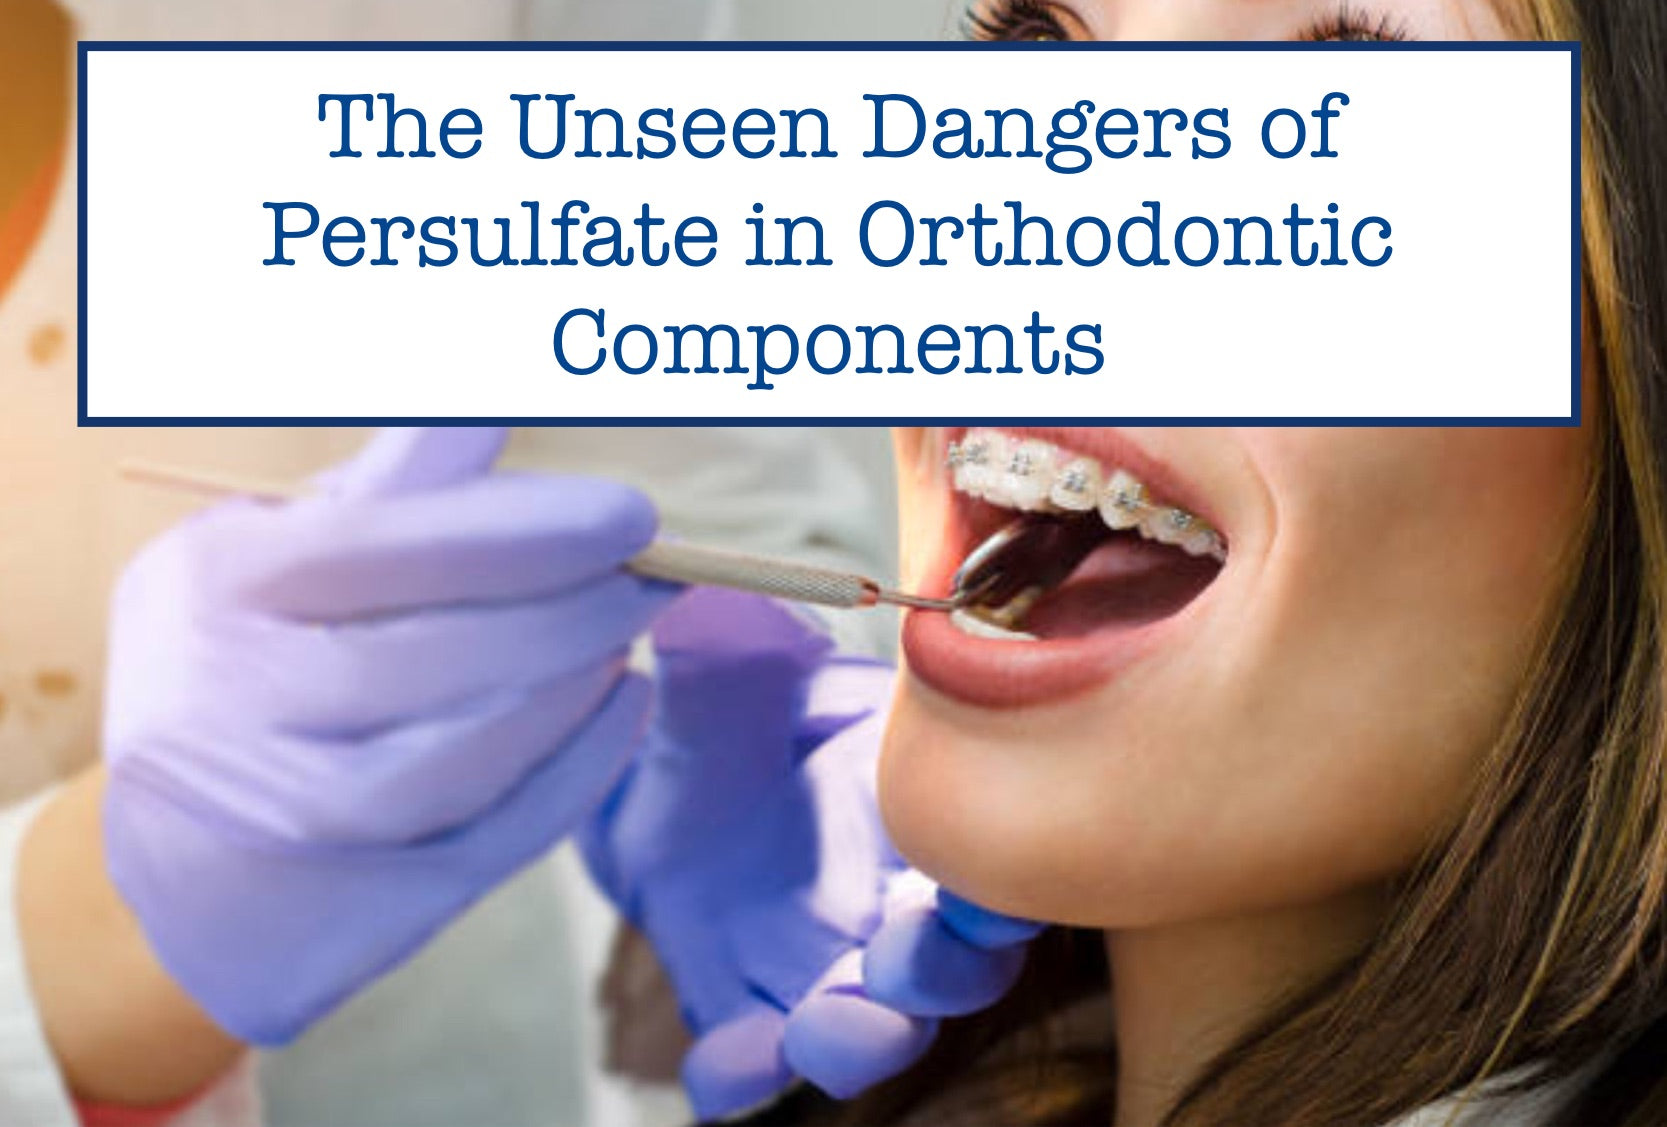 The Unseen Dangers of Persulfate in Orthodontic Components